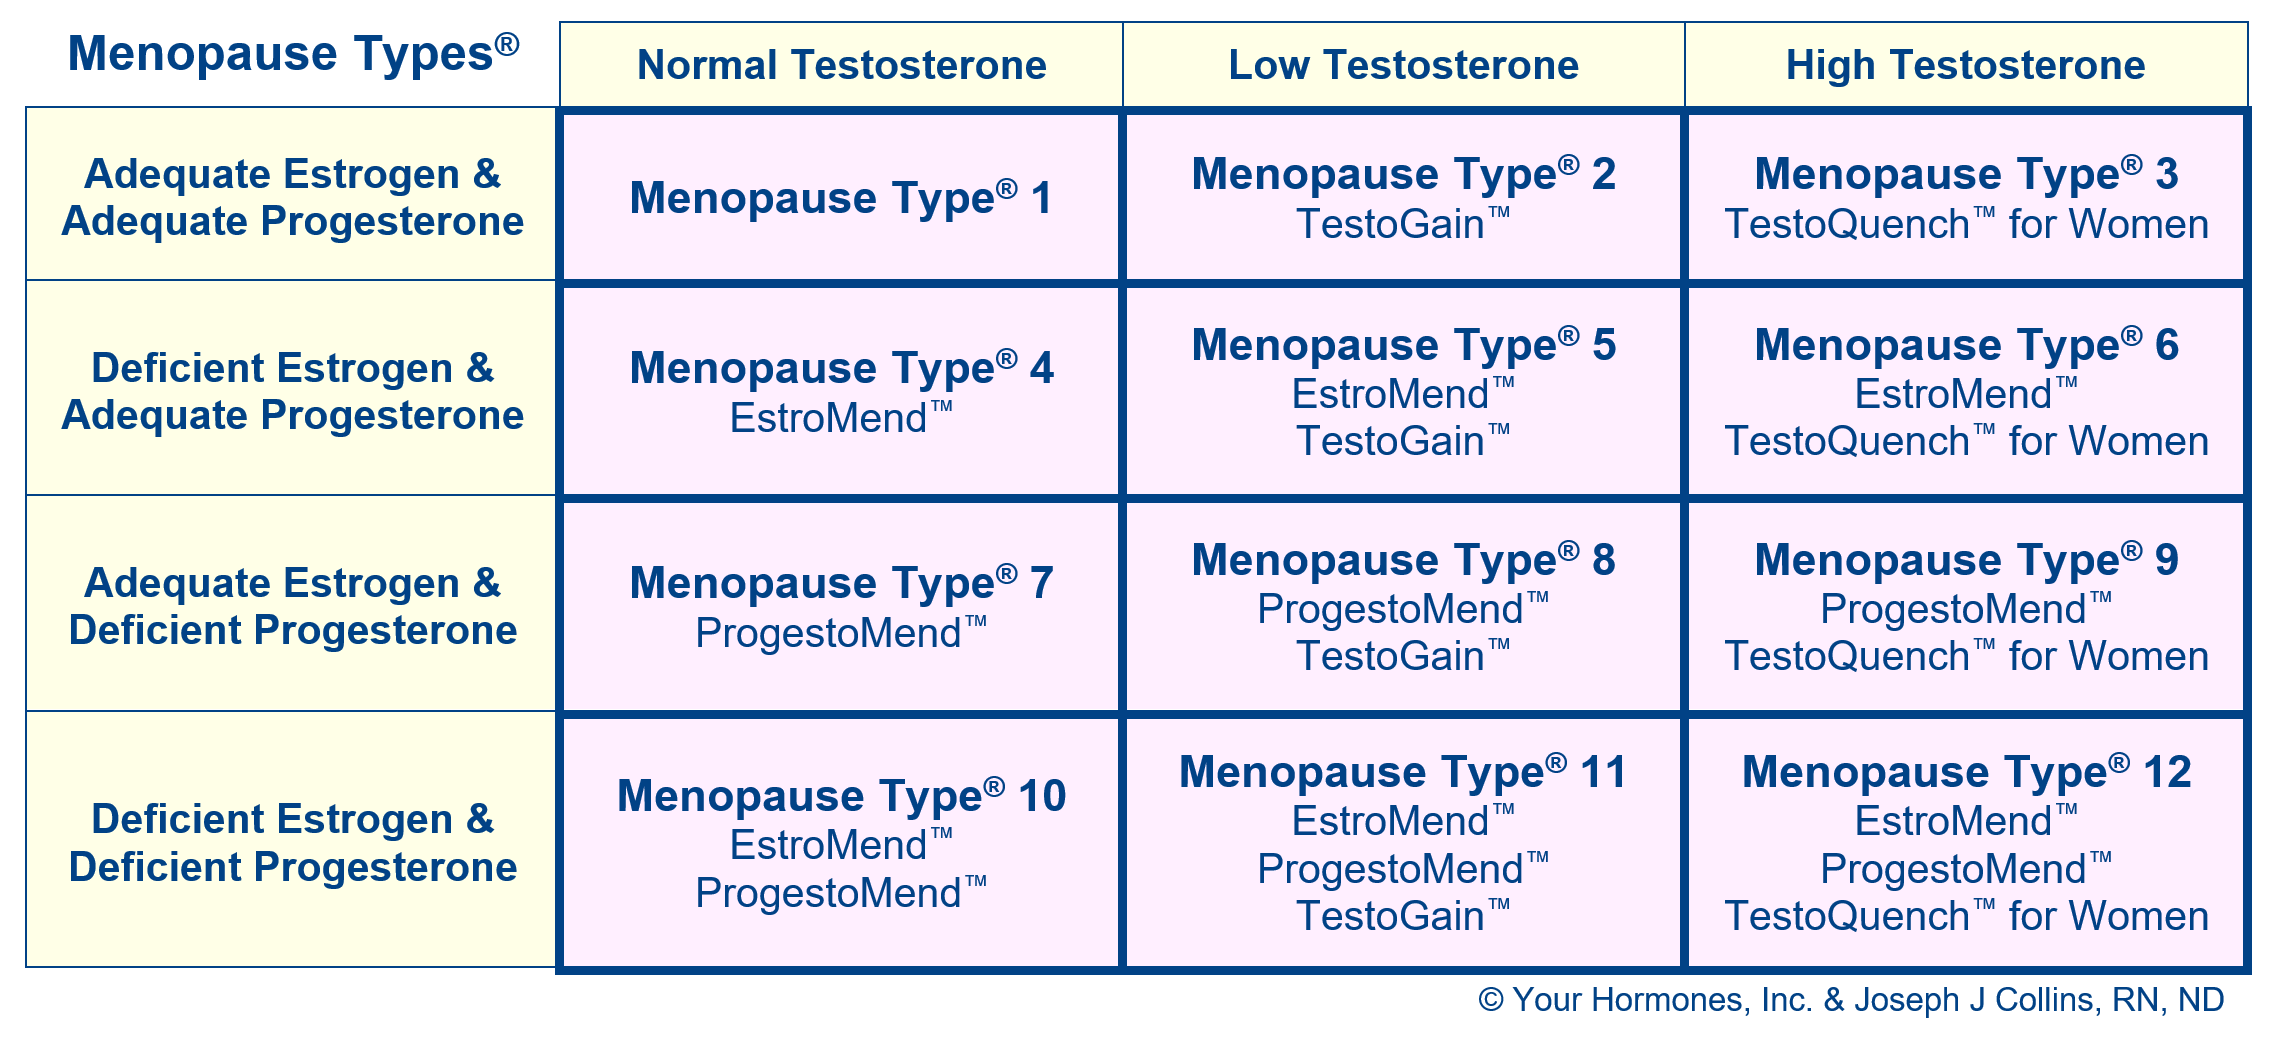 See how to use the Menopause Type® Chart 